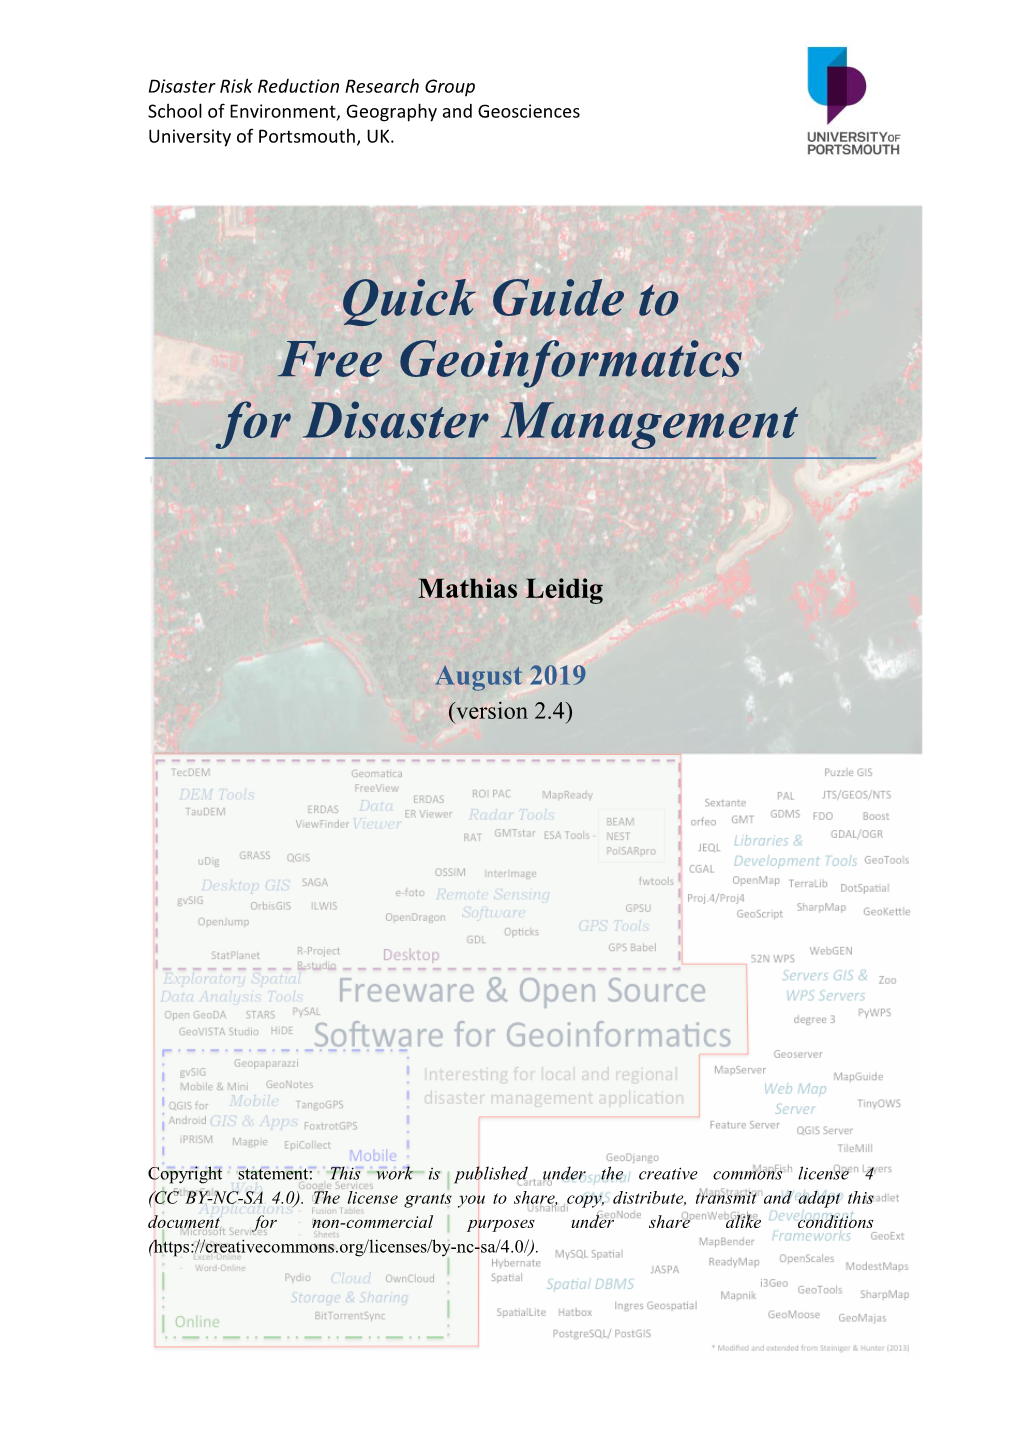 Quick Guide to Free Geoinformatics for Disaster Management